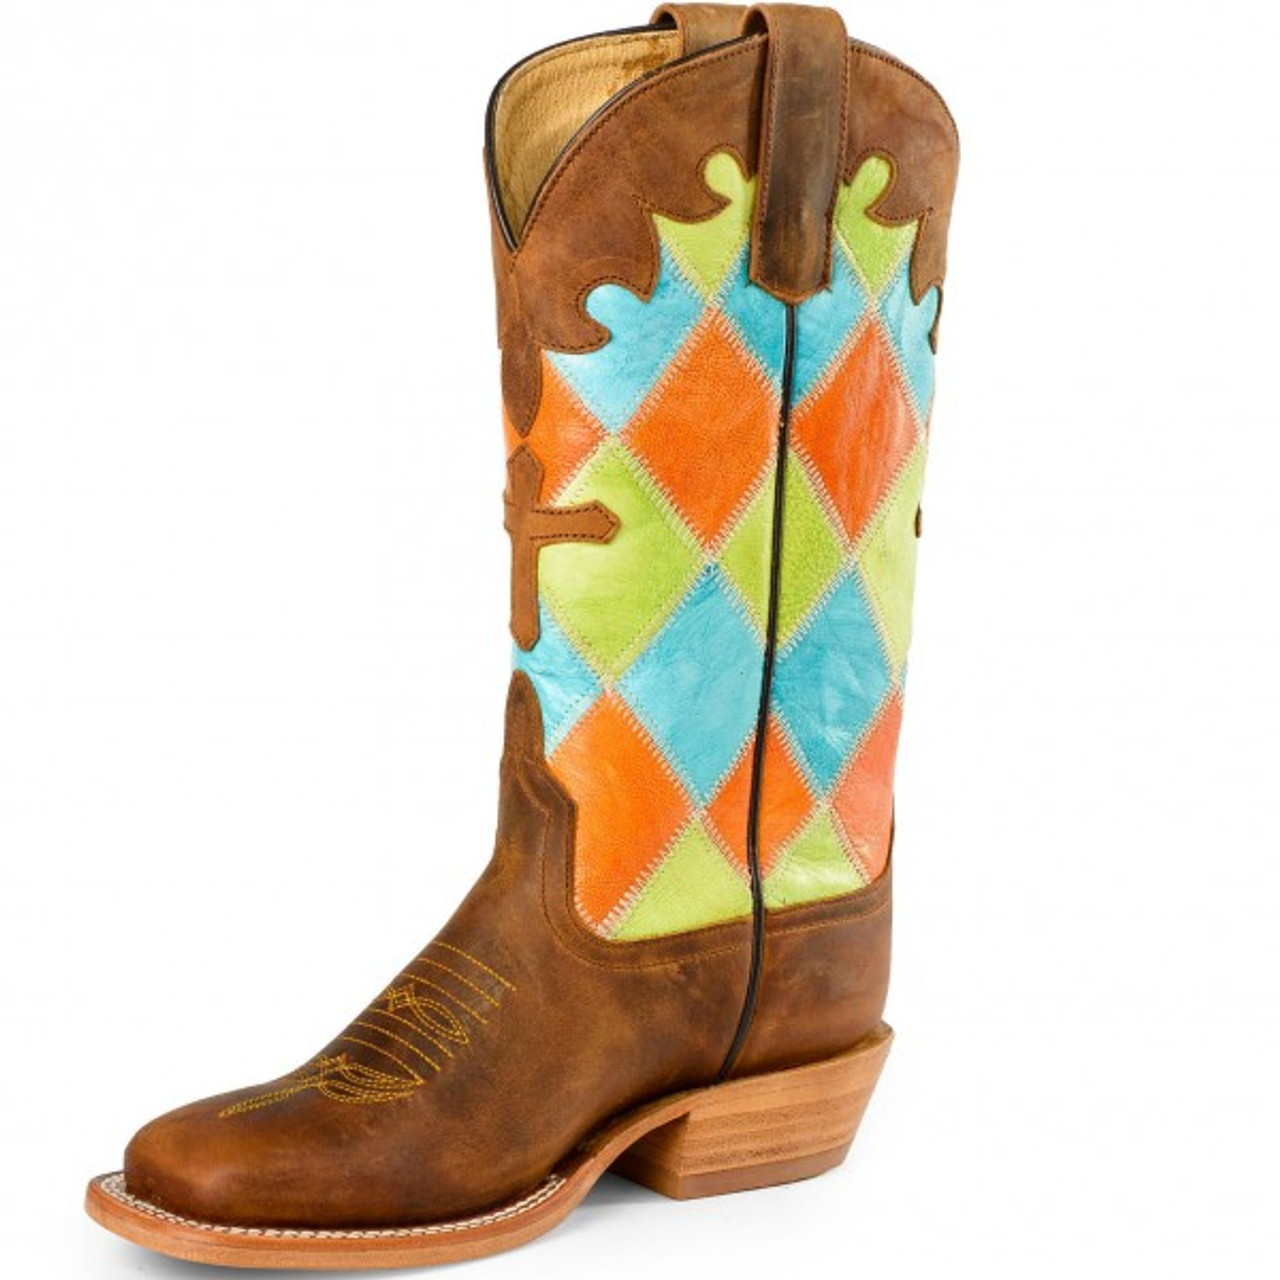 anderson bean western boots